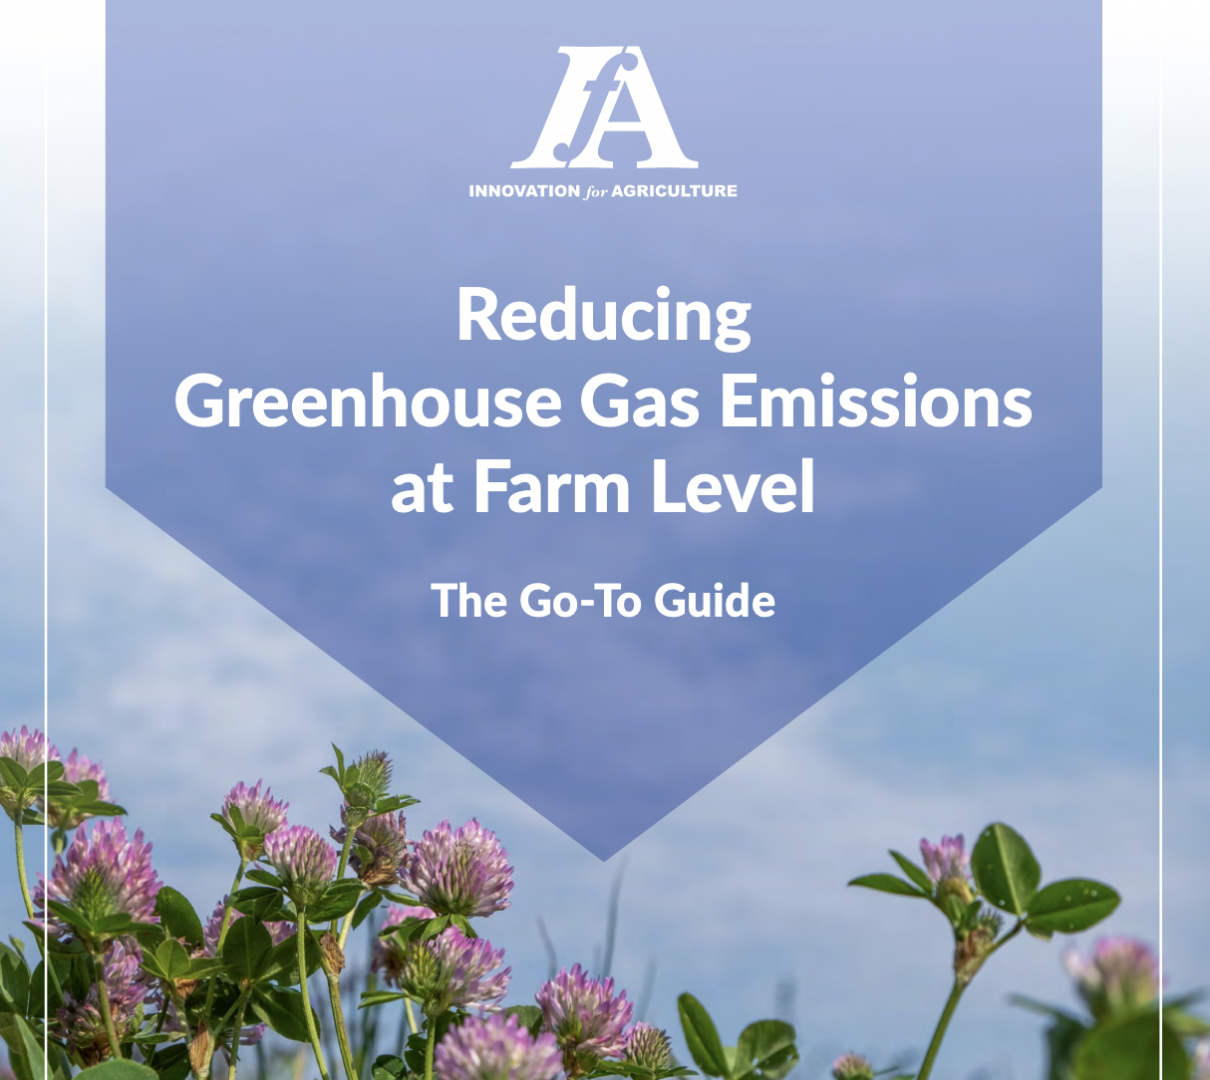 The Go-to-guide for reducing GHG emissions